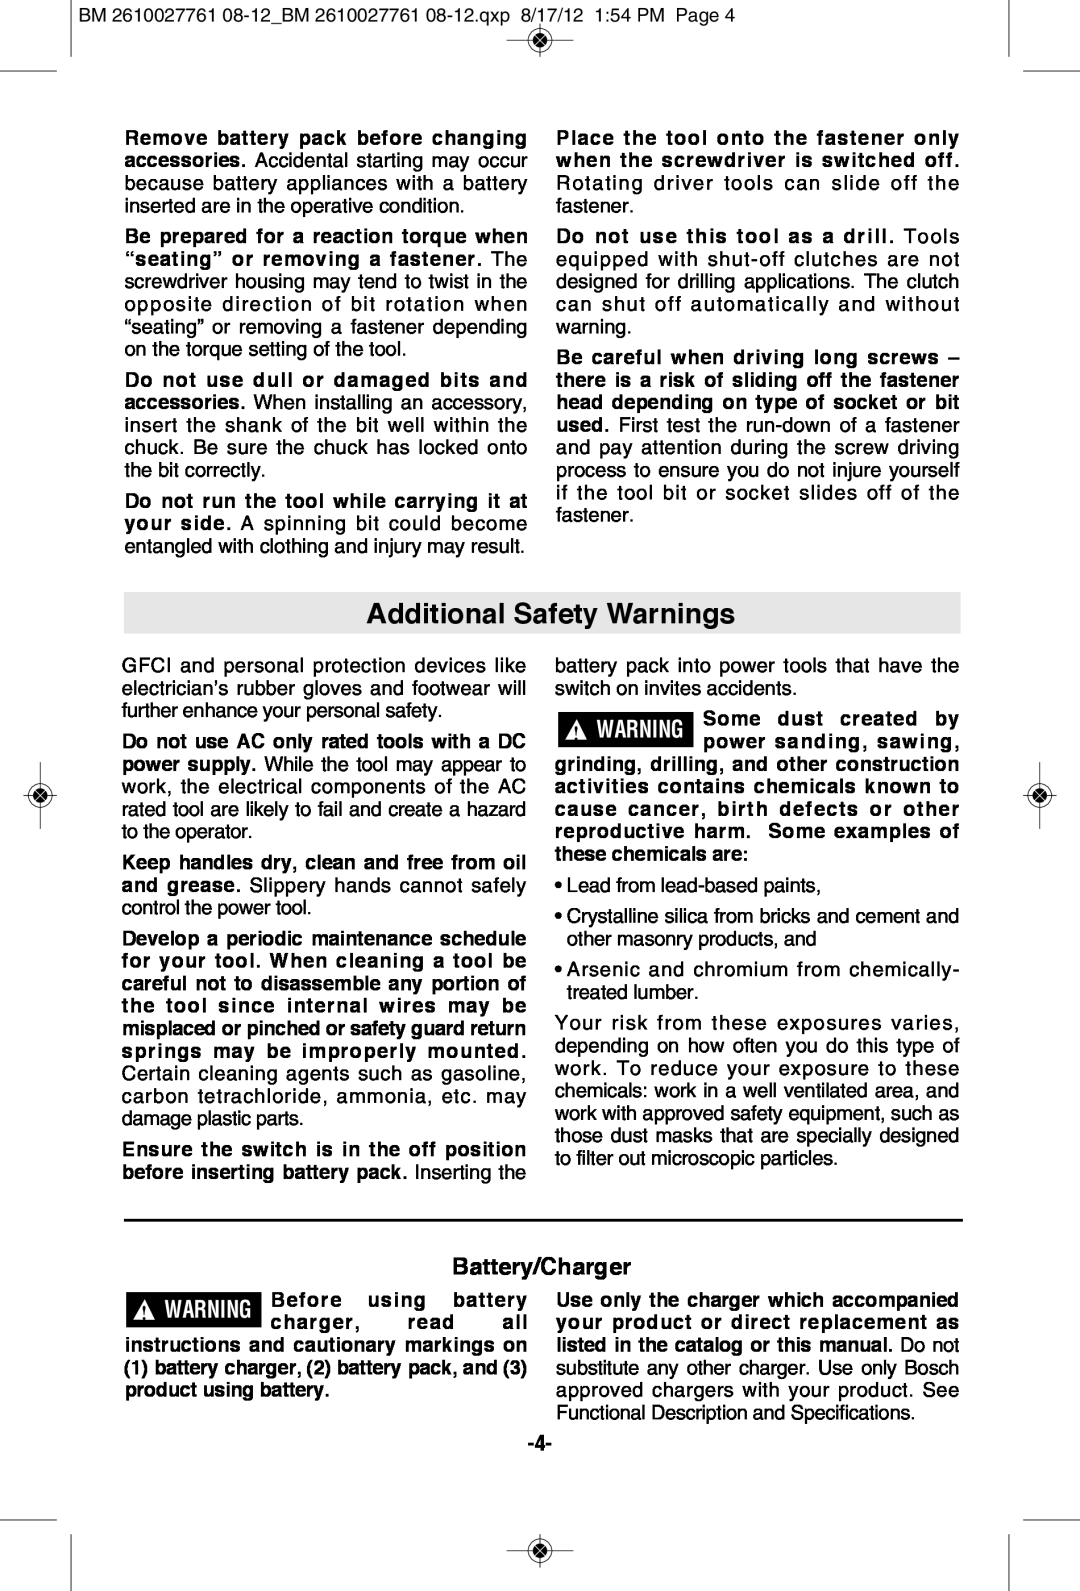 Bosch Power Tools 25618-02 Additional Safety Warnings, Battery/Charger, WARNING Some dust created by power sanding, sawing 